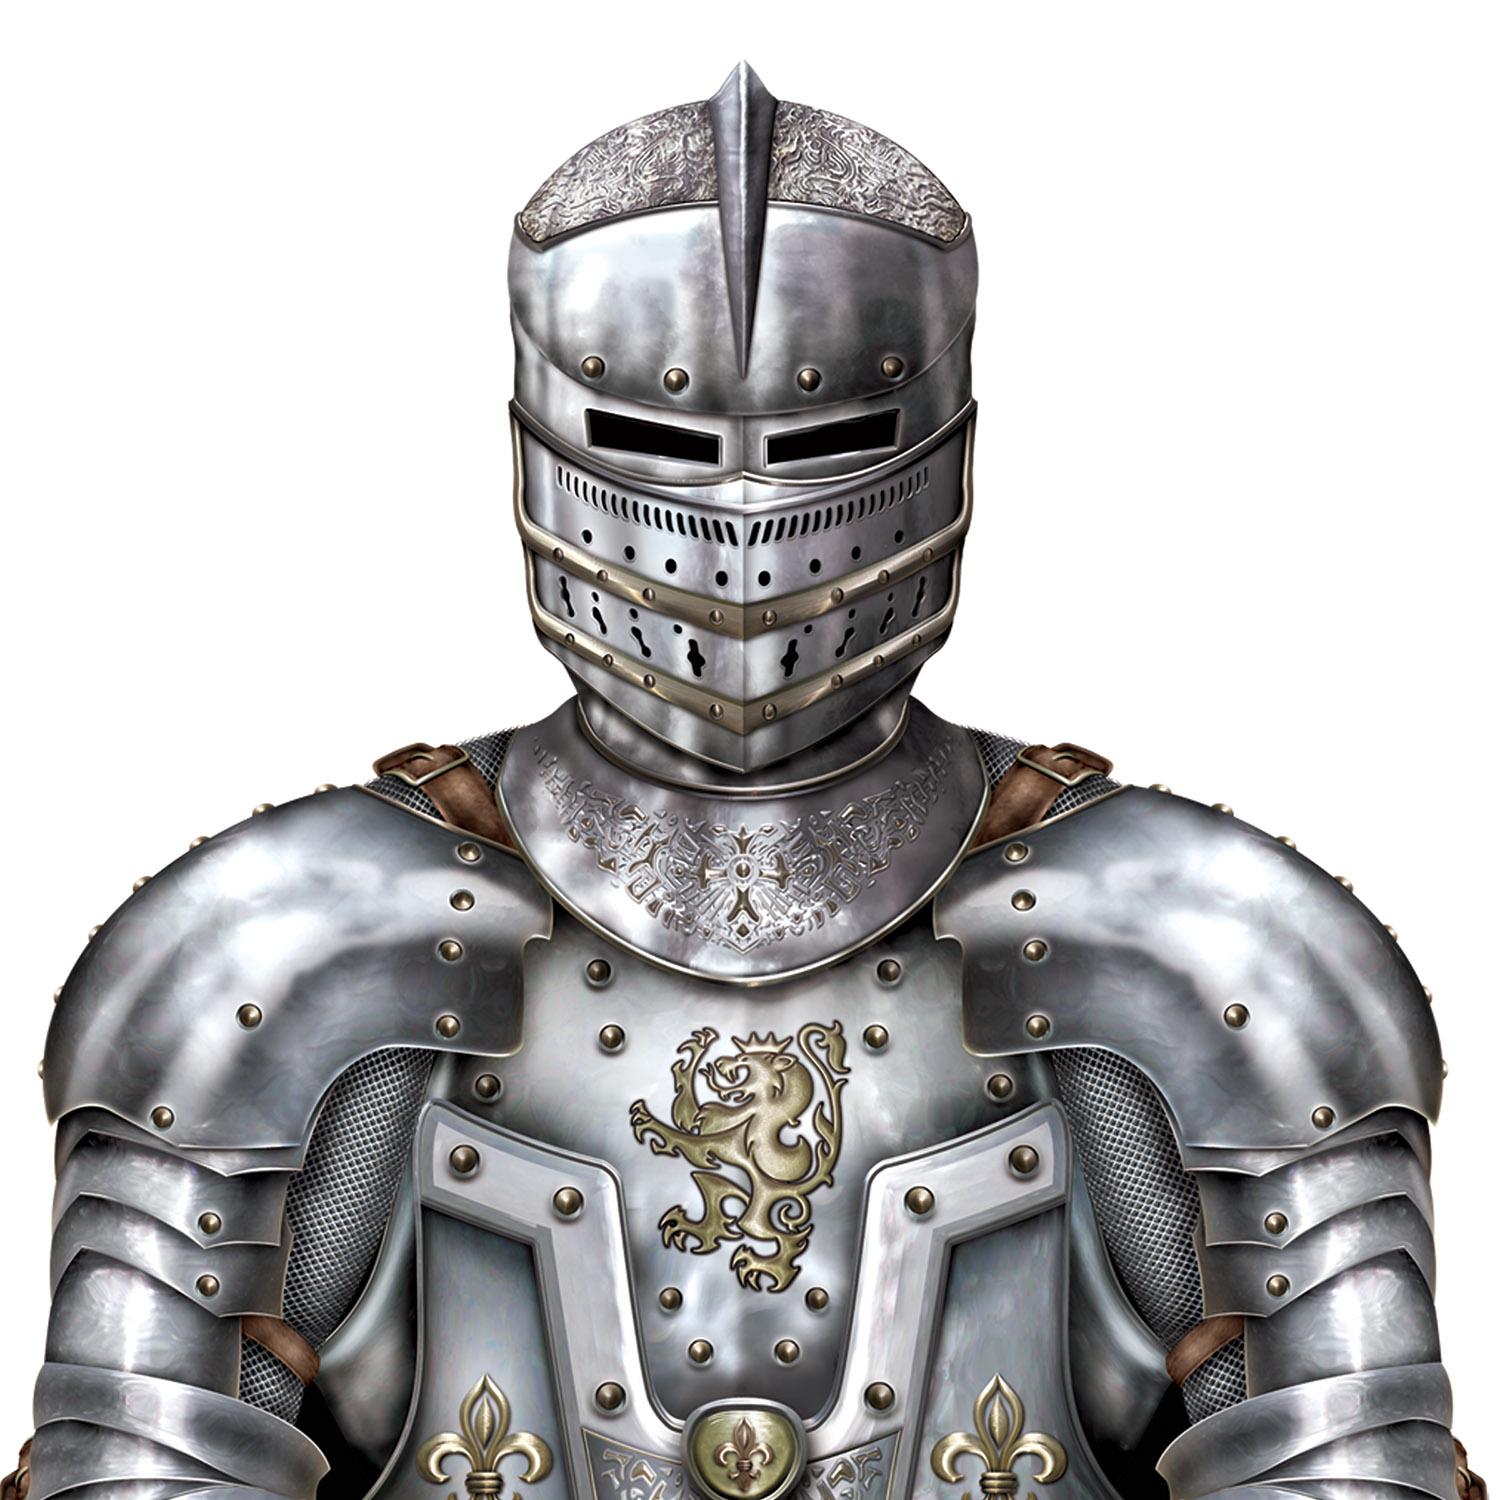 Beistle Jointed Suit Of Armor Party Decoration